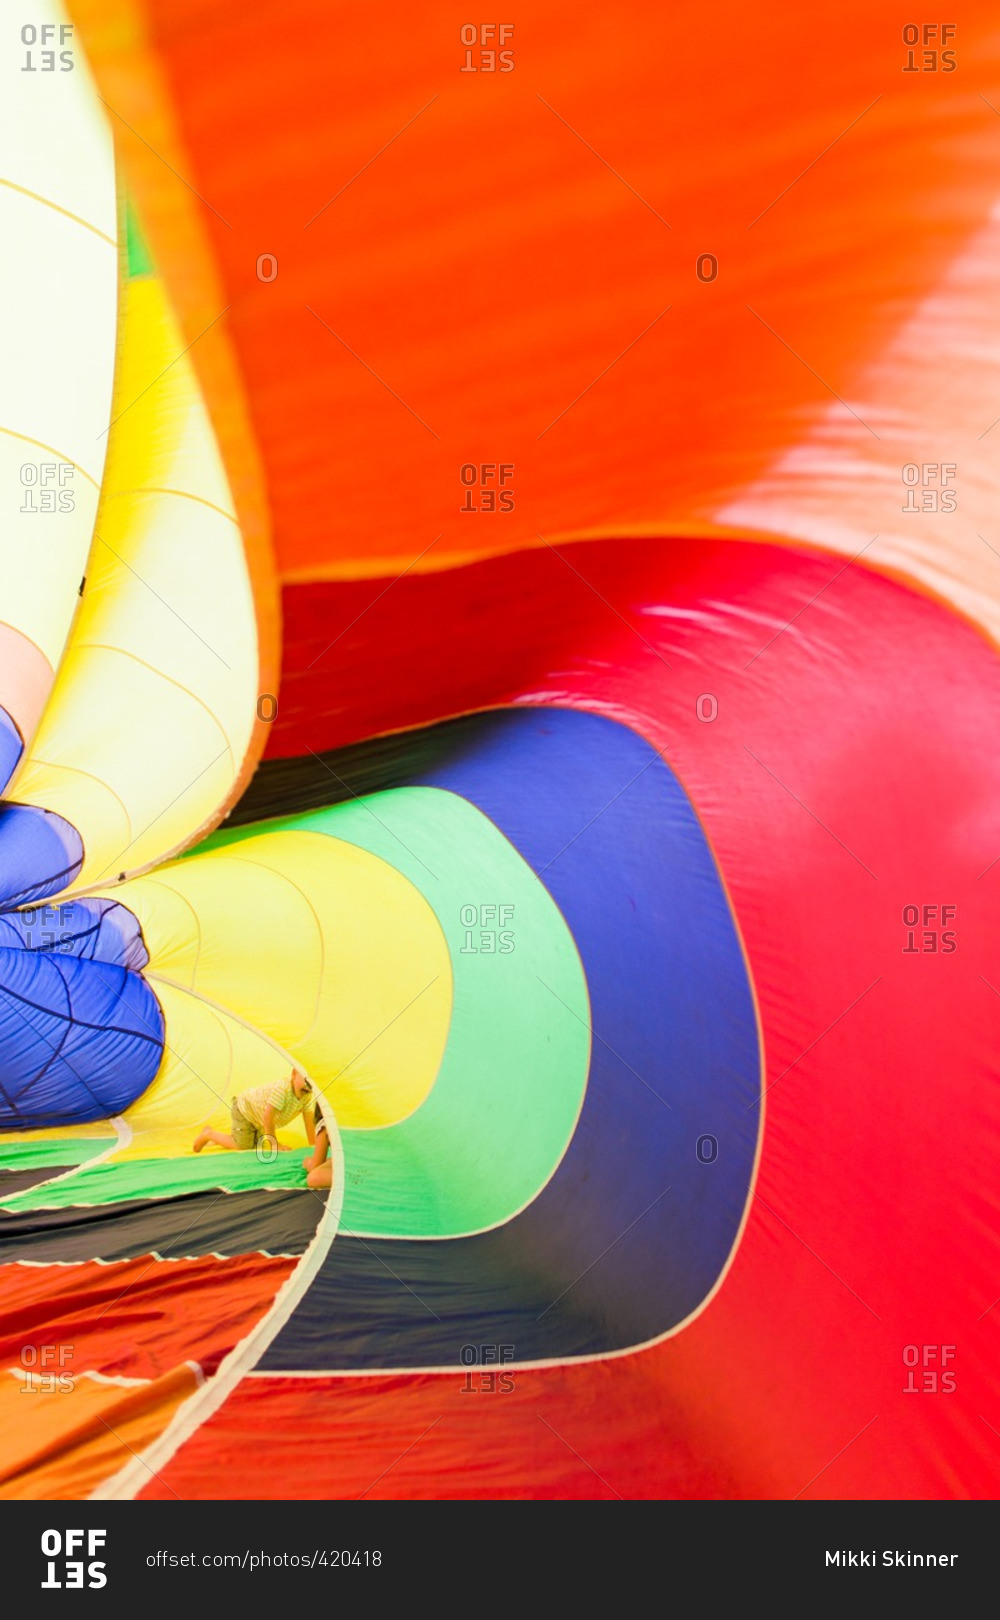 Children playing inside an inflatable rainbow parachute